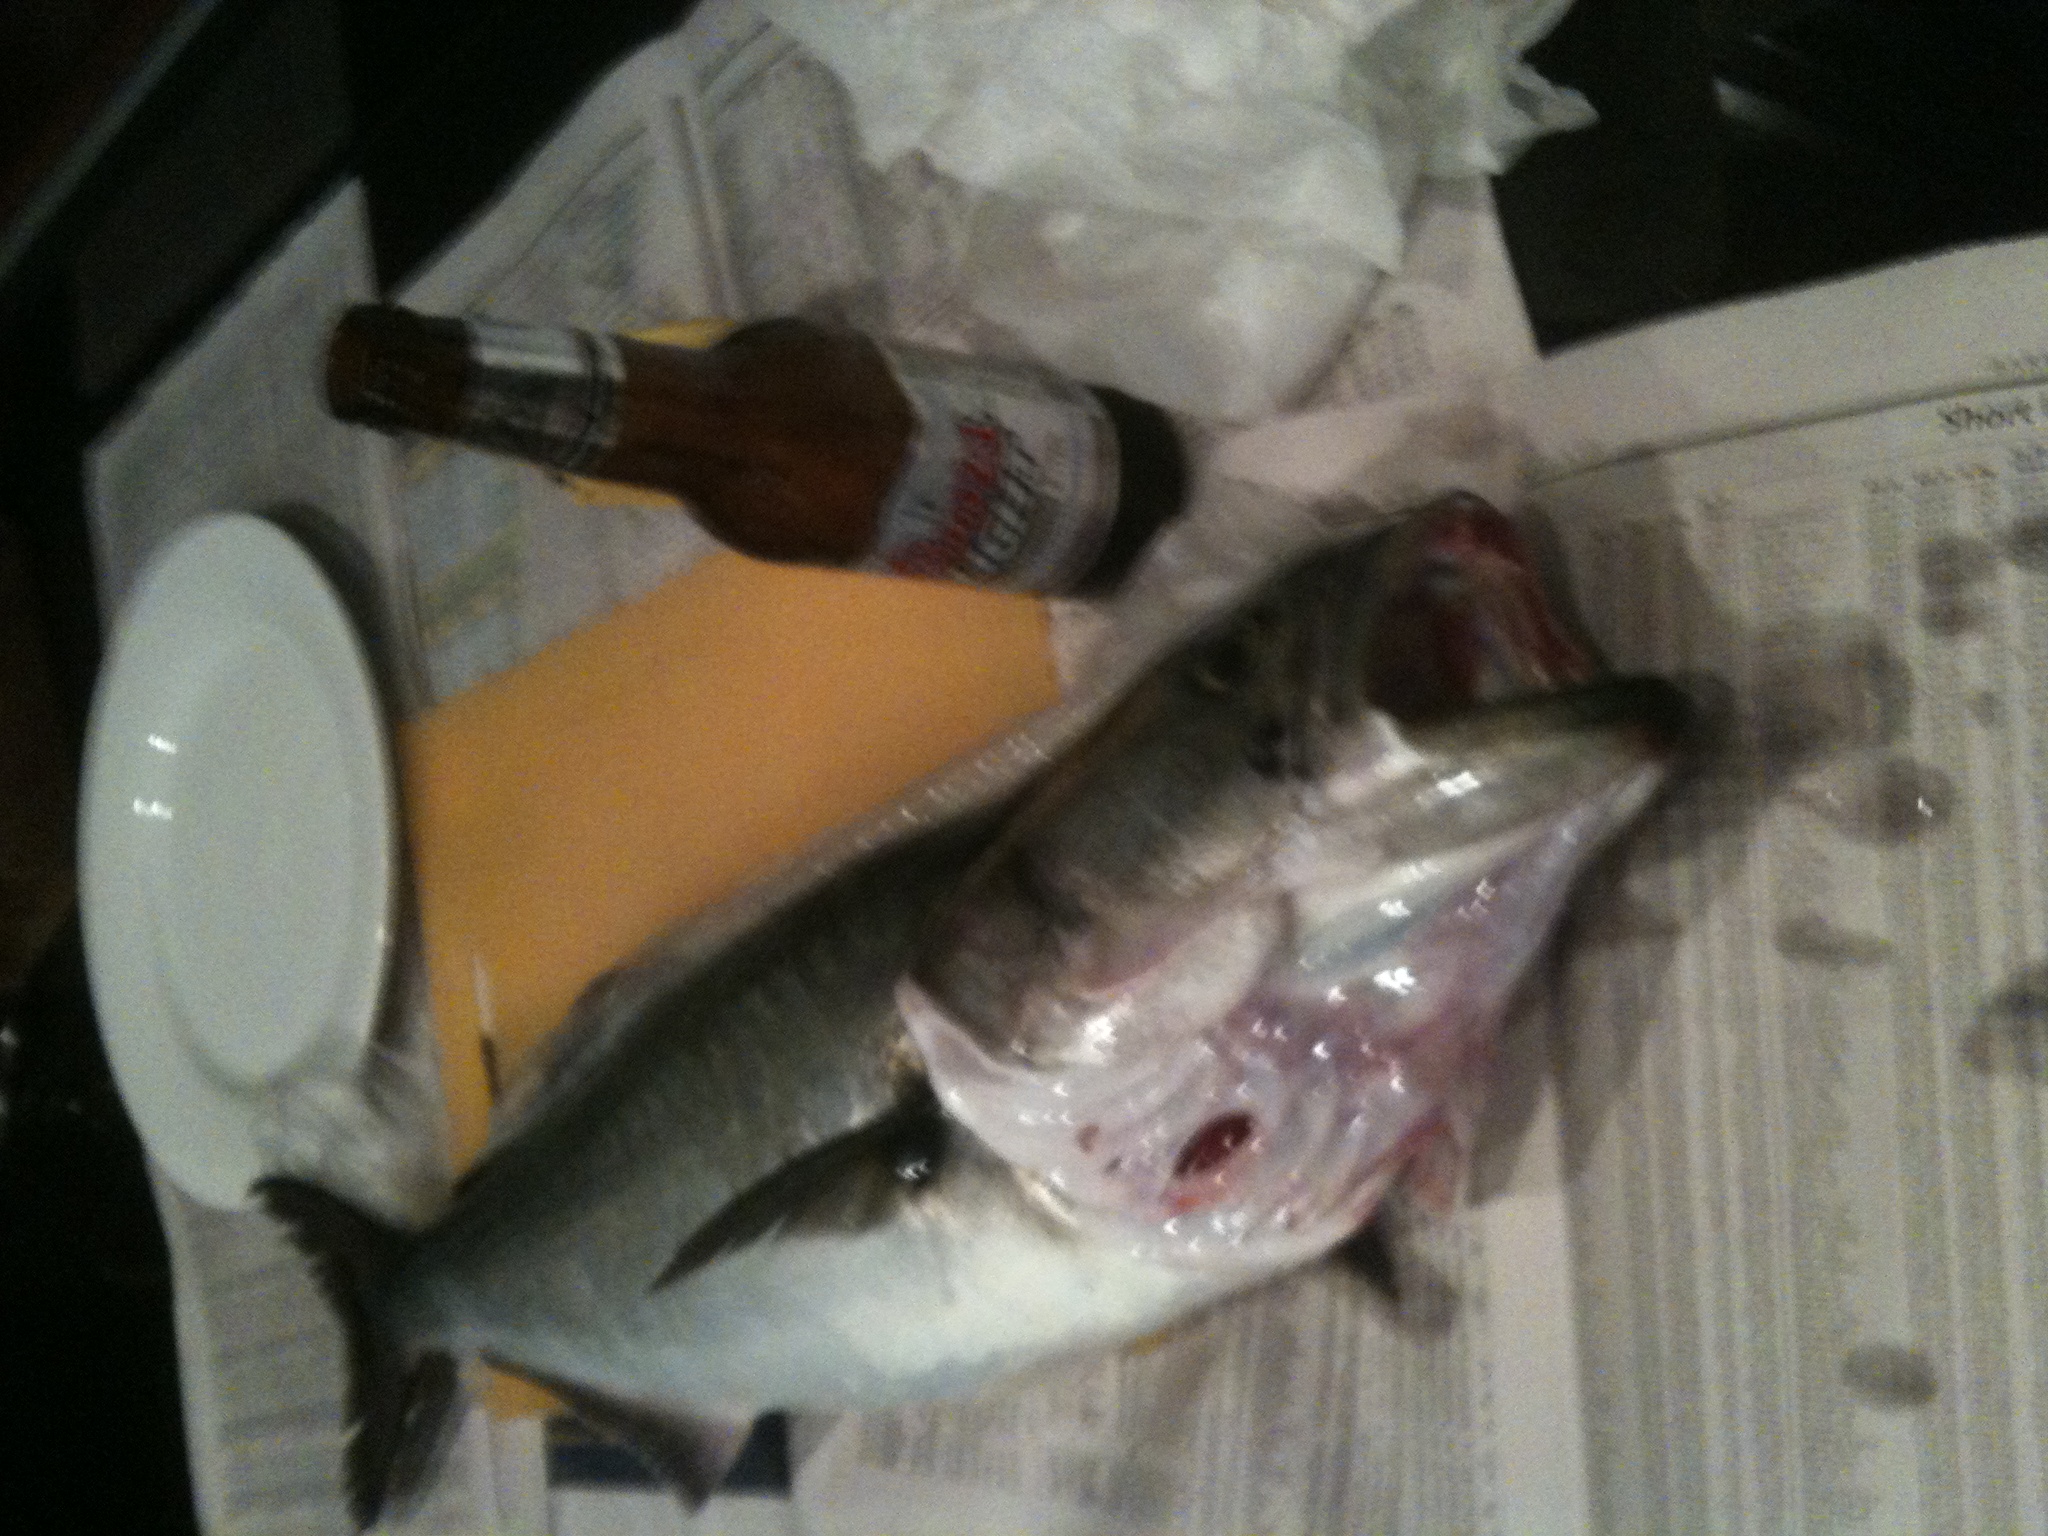 are bluefish good to eat